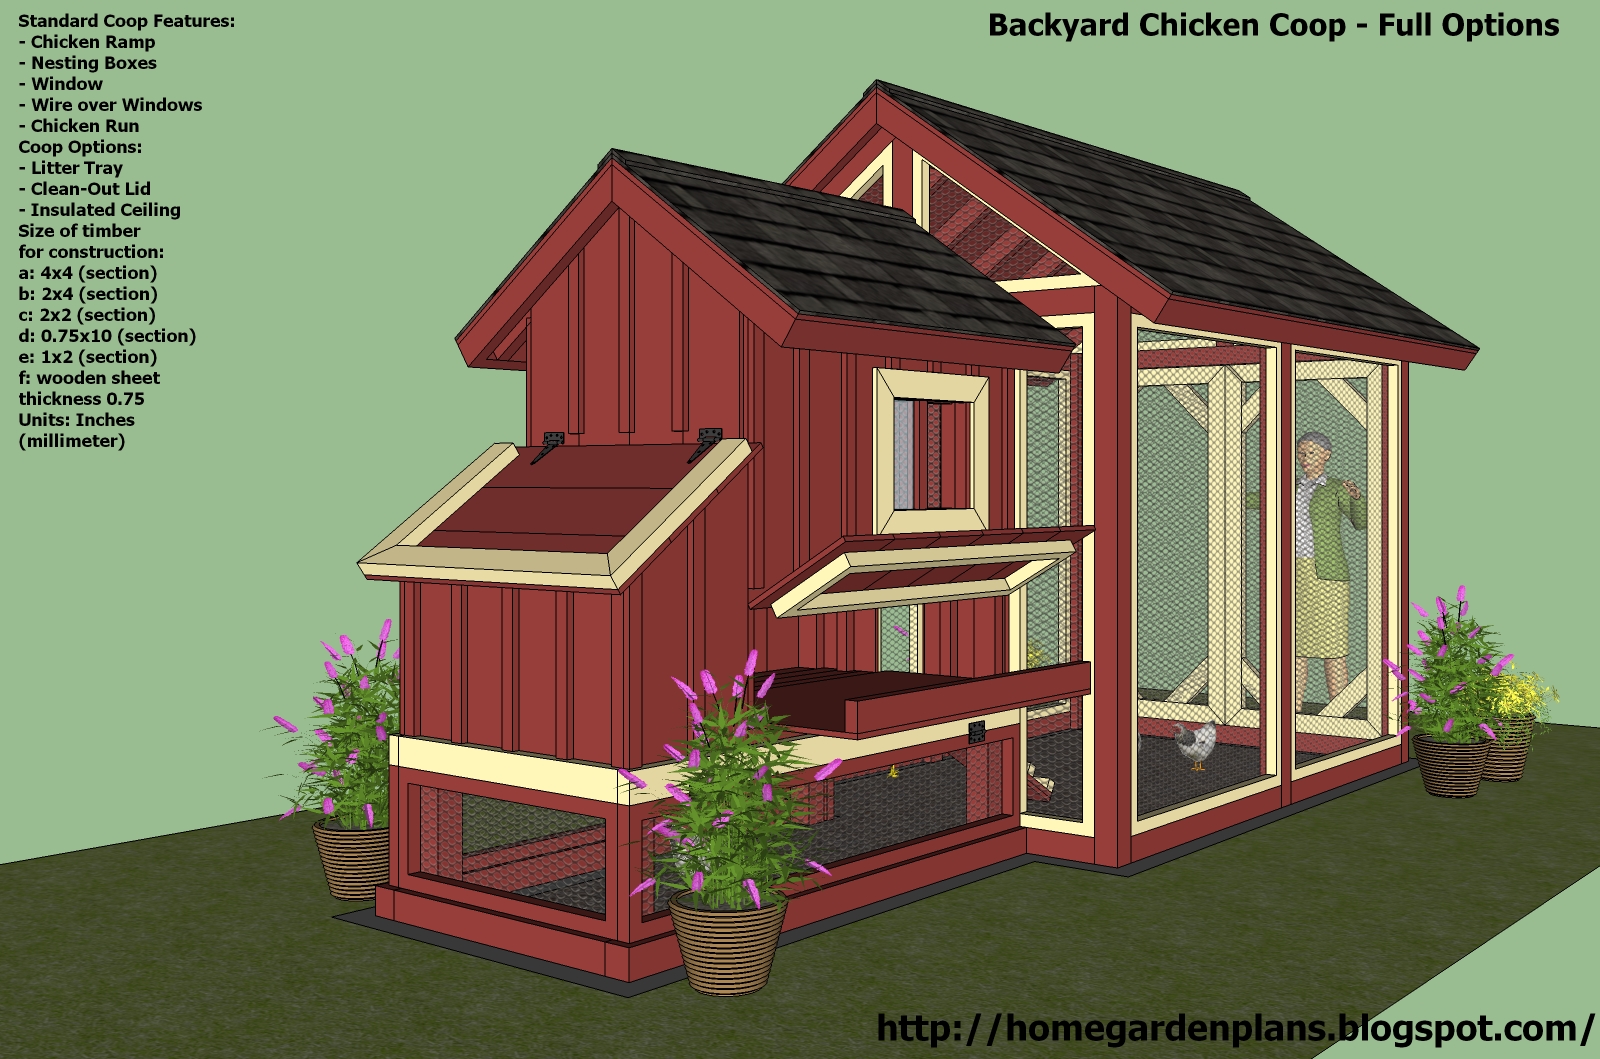 Back Yard Duck House Plans - House Design And Decorating Ideas